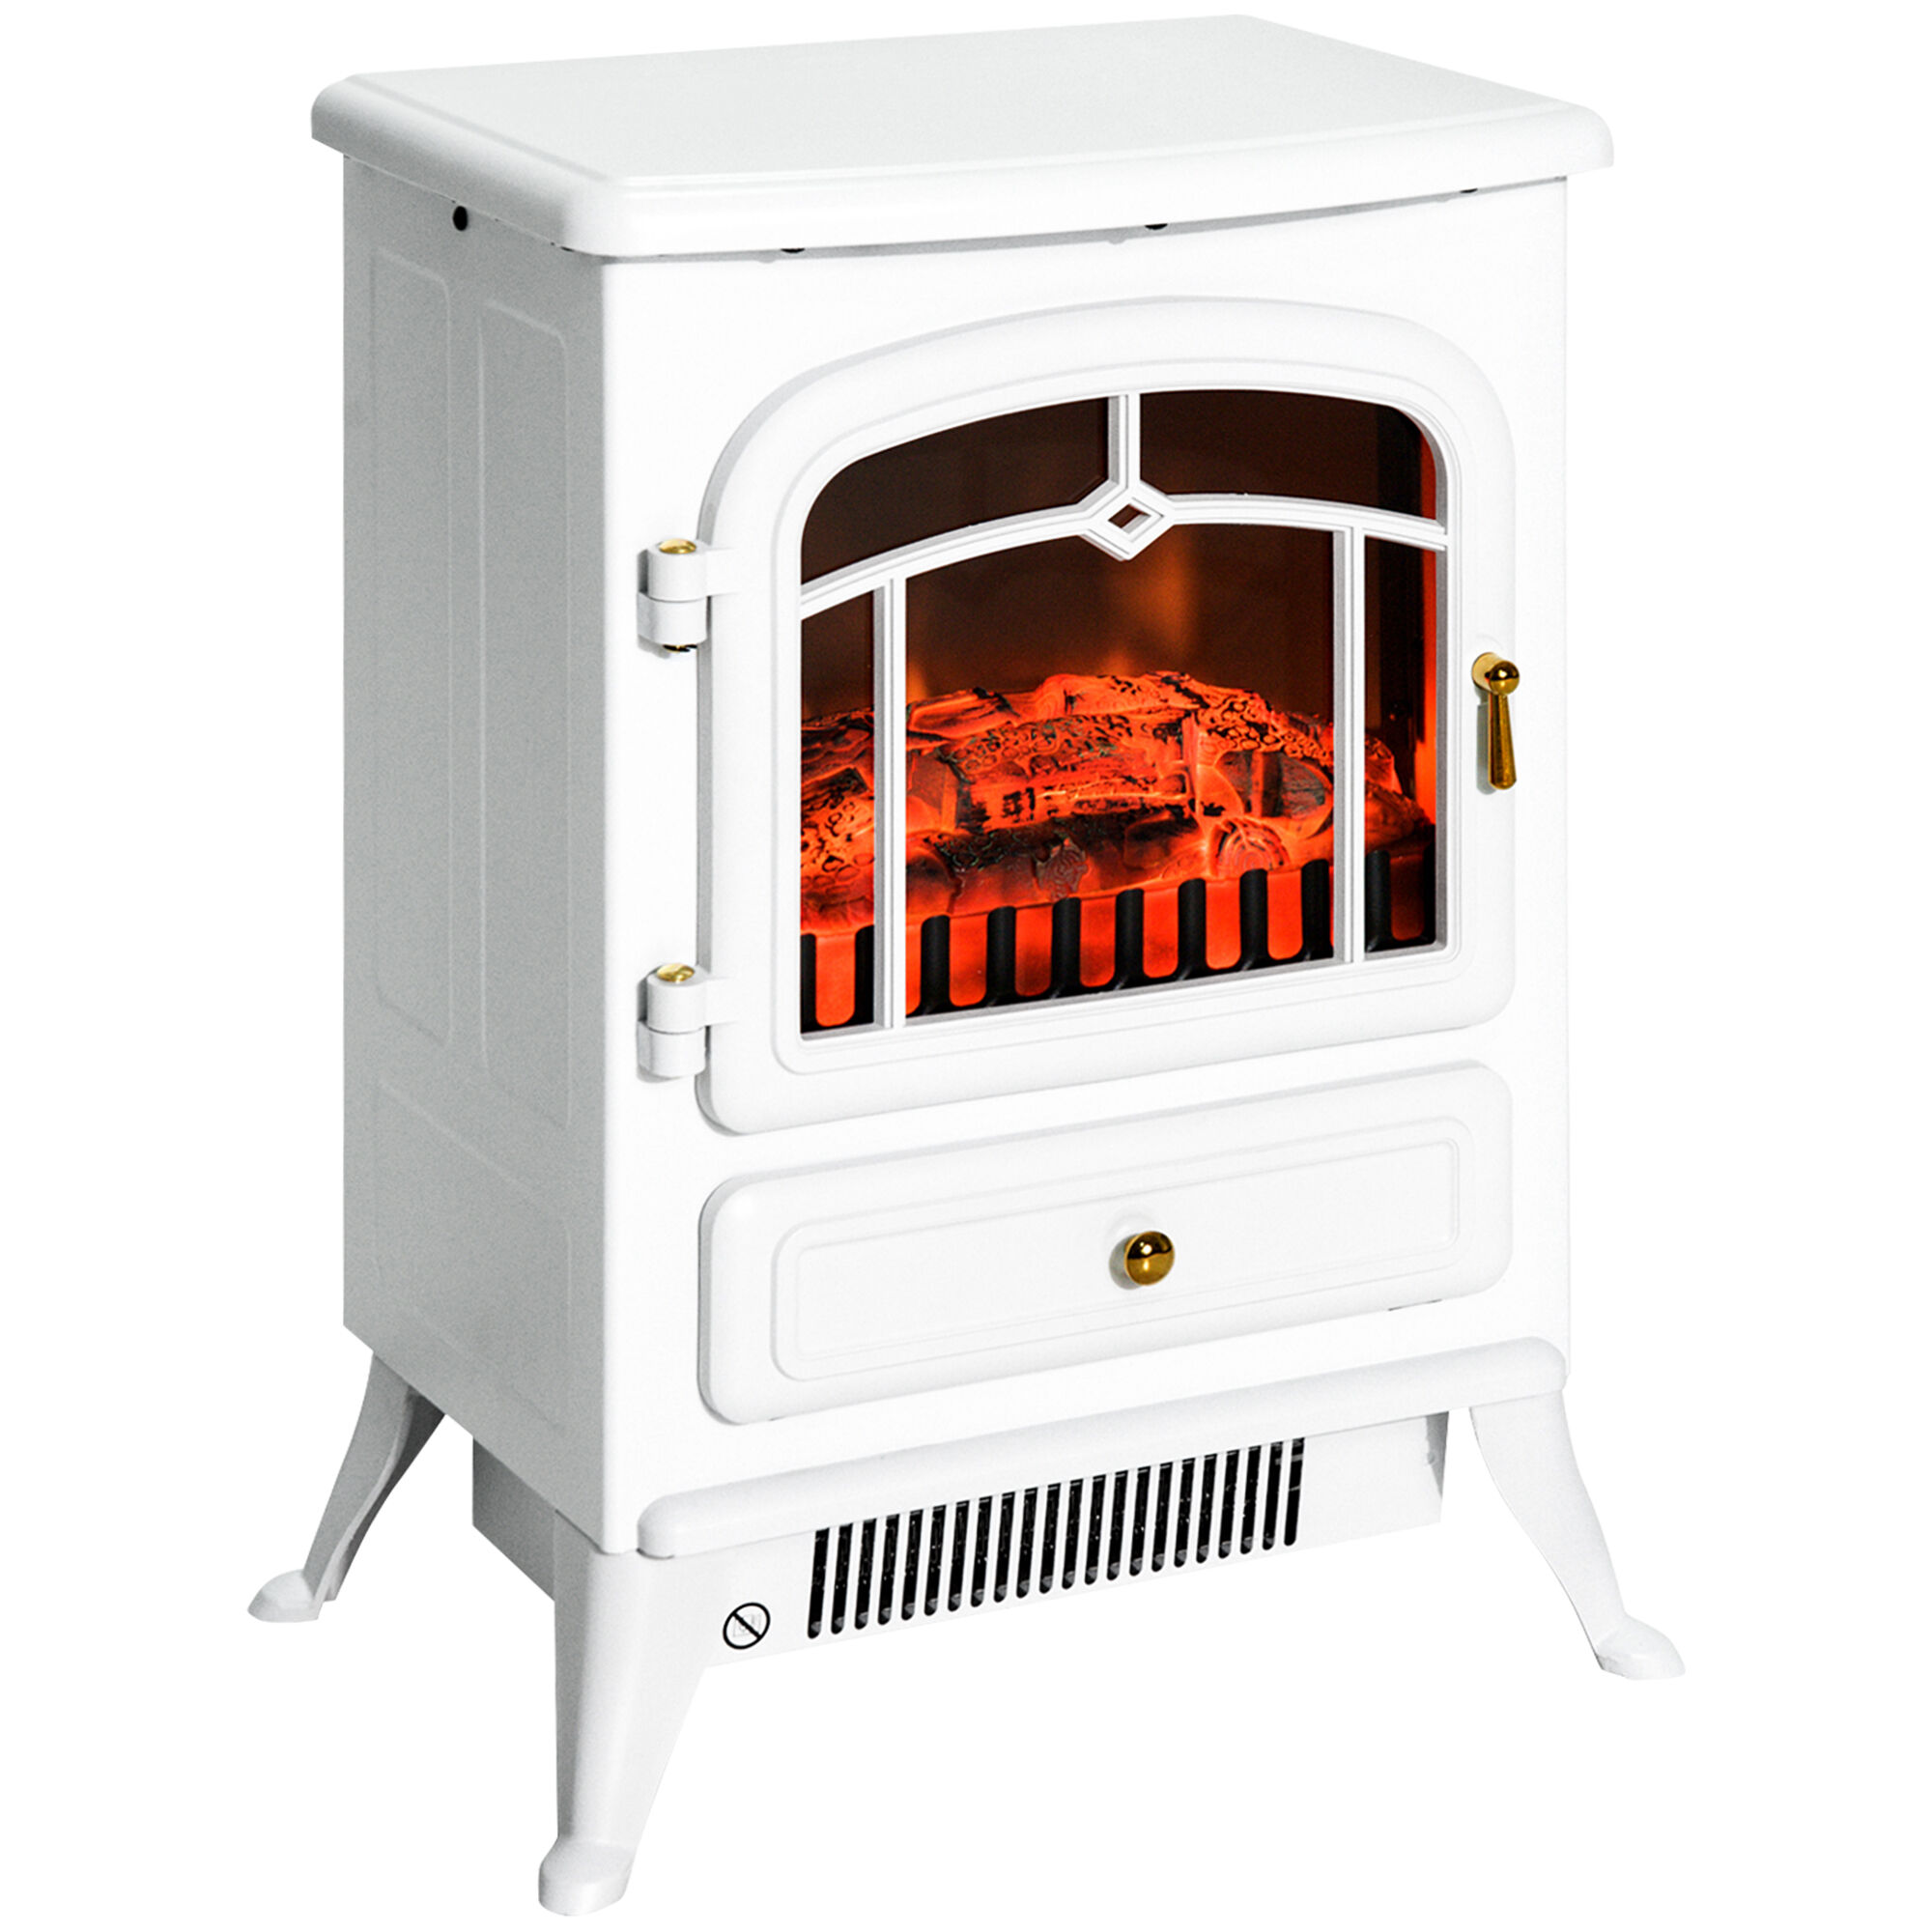 HOMCOM Electric Fireplace Heater, White Fireplace Stove with Realistic LED Log Flames and Overheating Safety Protection, 750/1500W